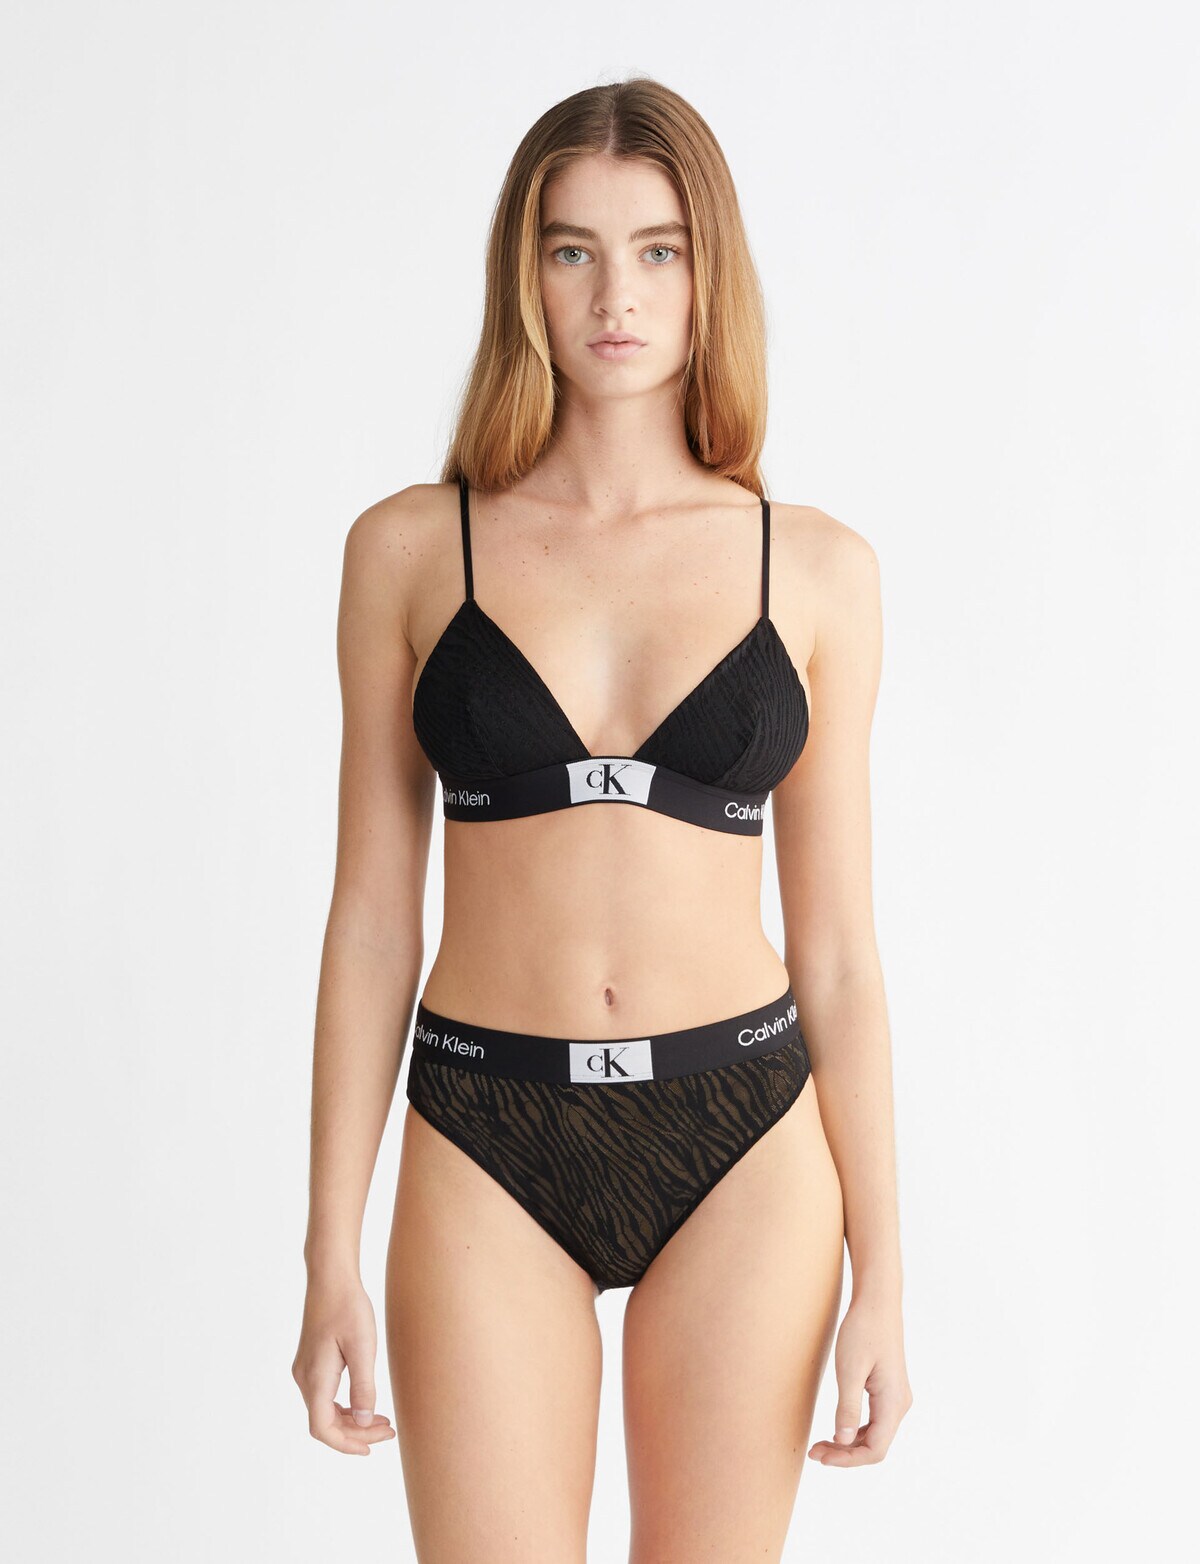 Calvin Klein CK96 unlined triangle bralet in black animal lace